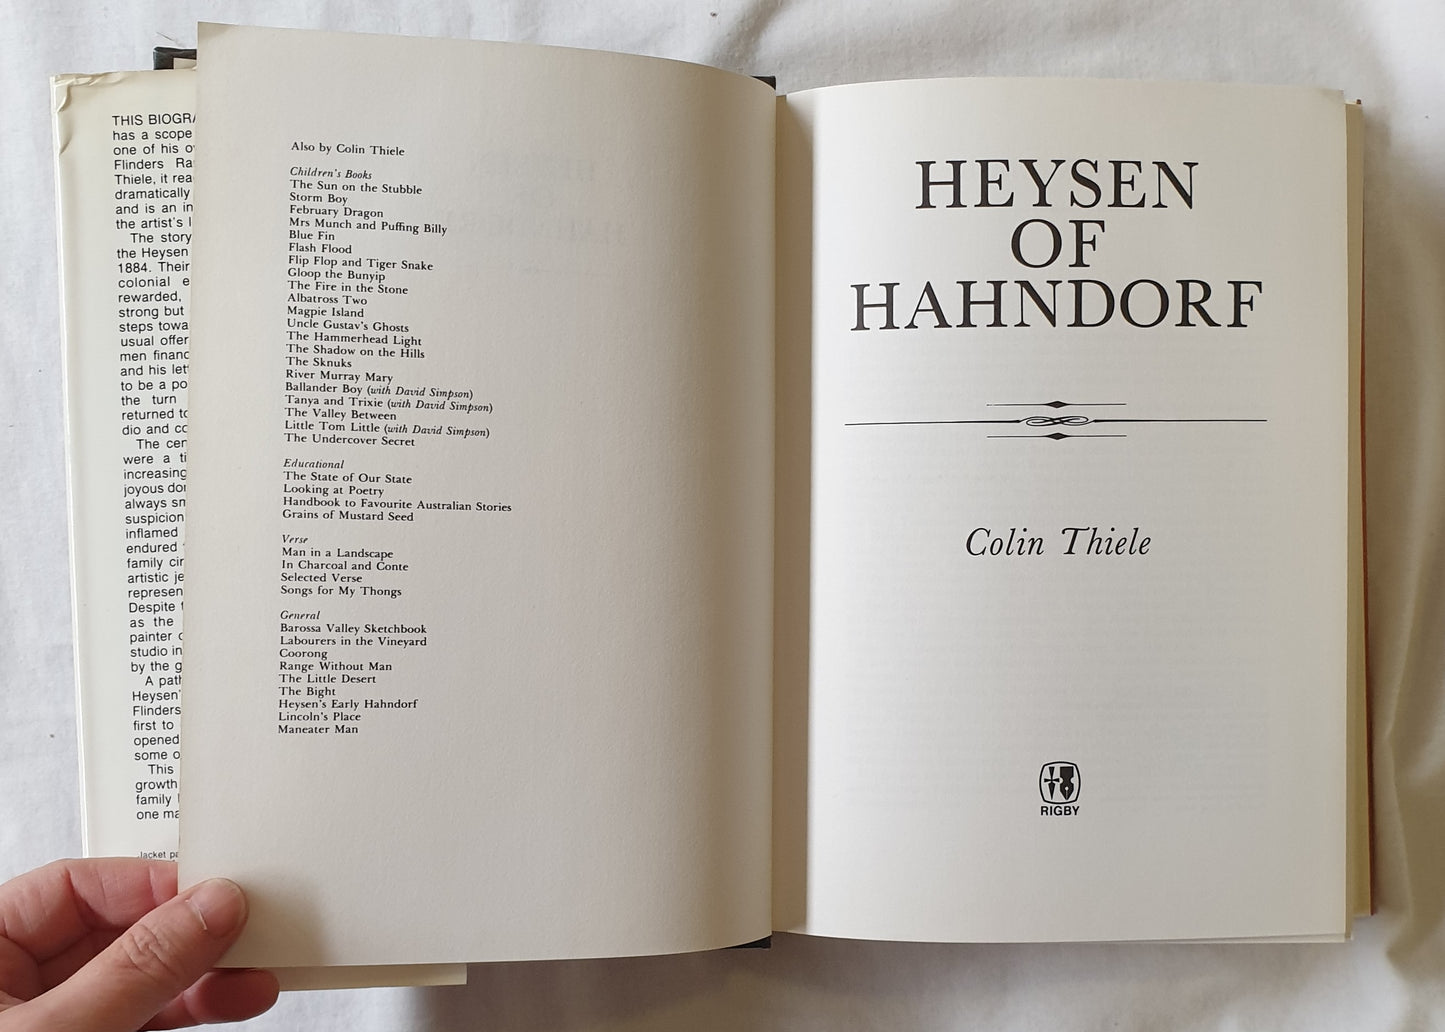 Heysen of Hahndorf by Colin Thiele